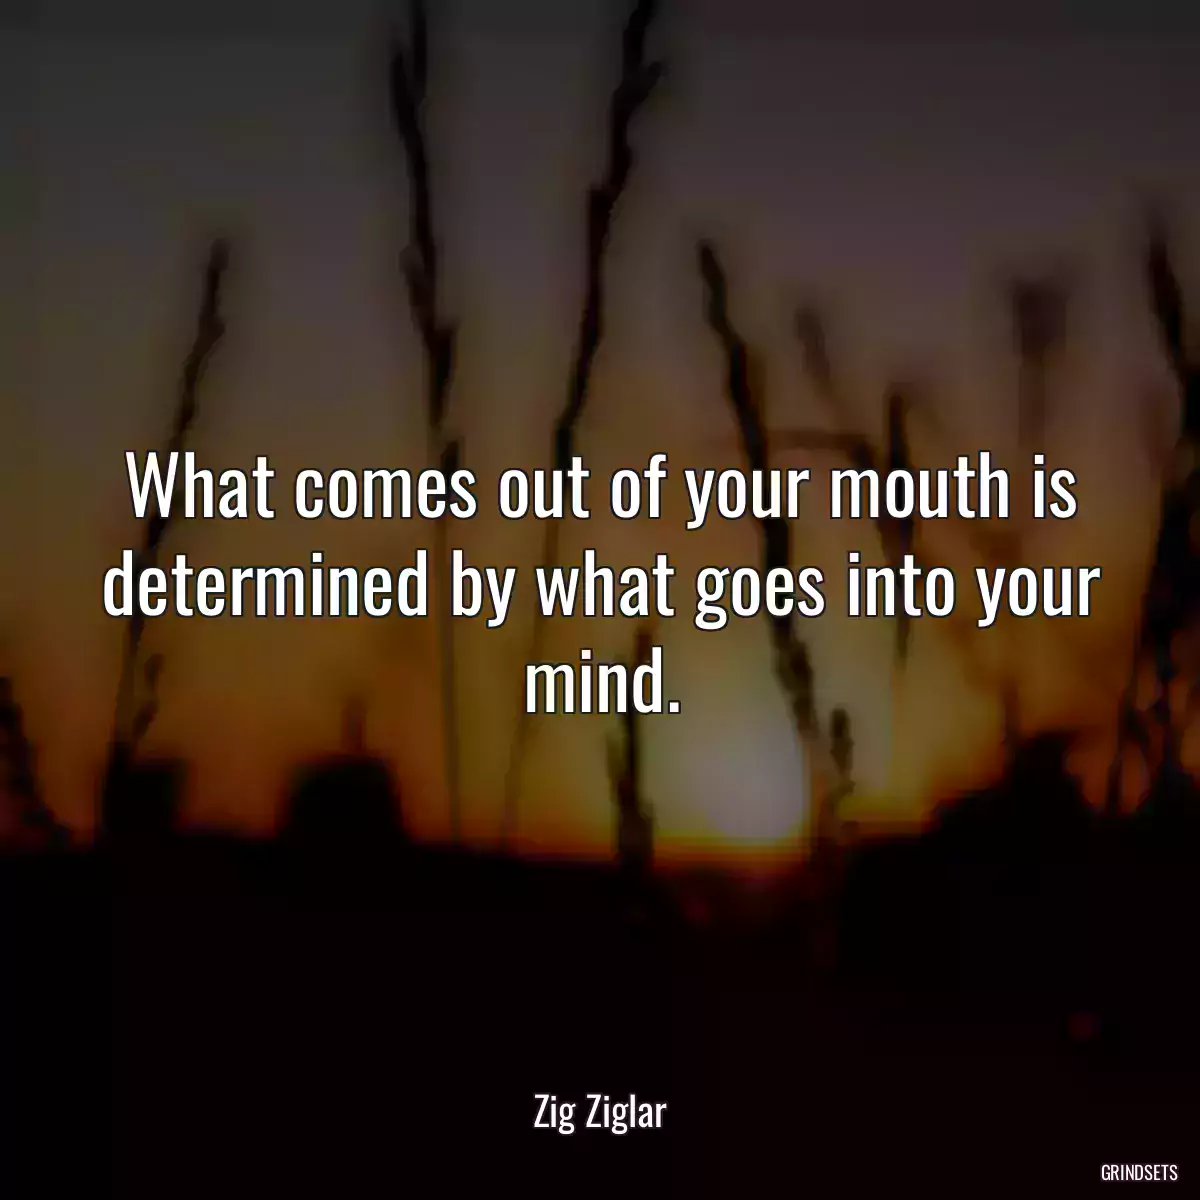 What comes out of your mouth is determined by what goes into your mind.